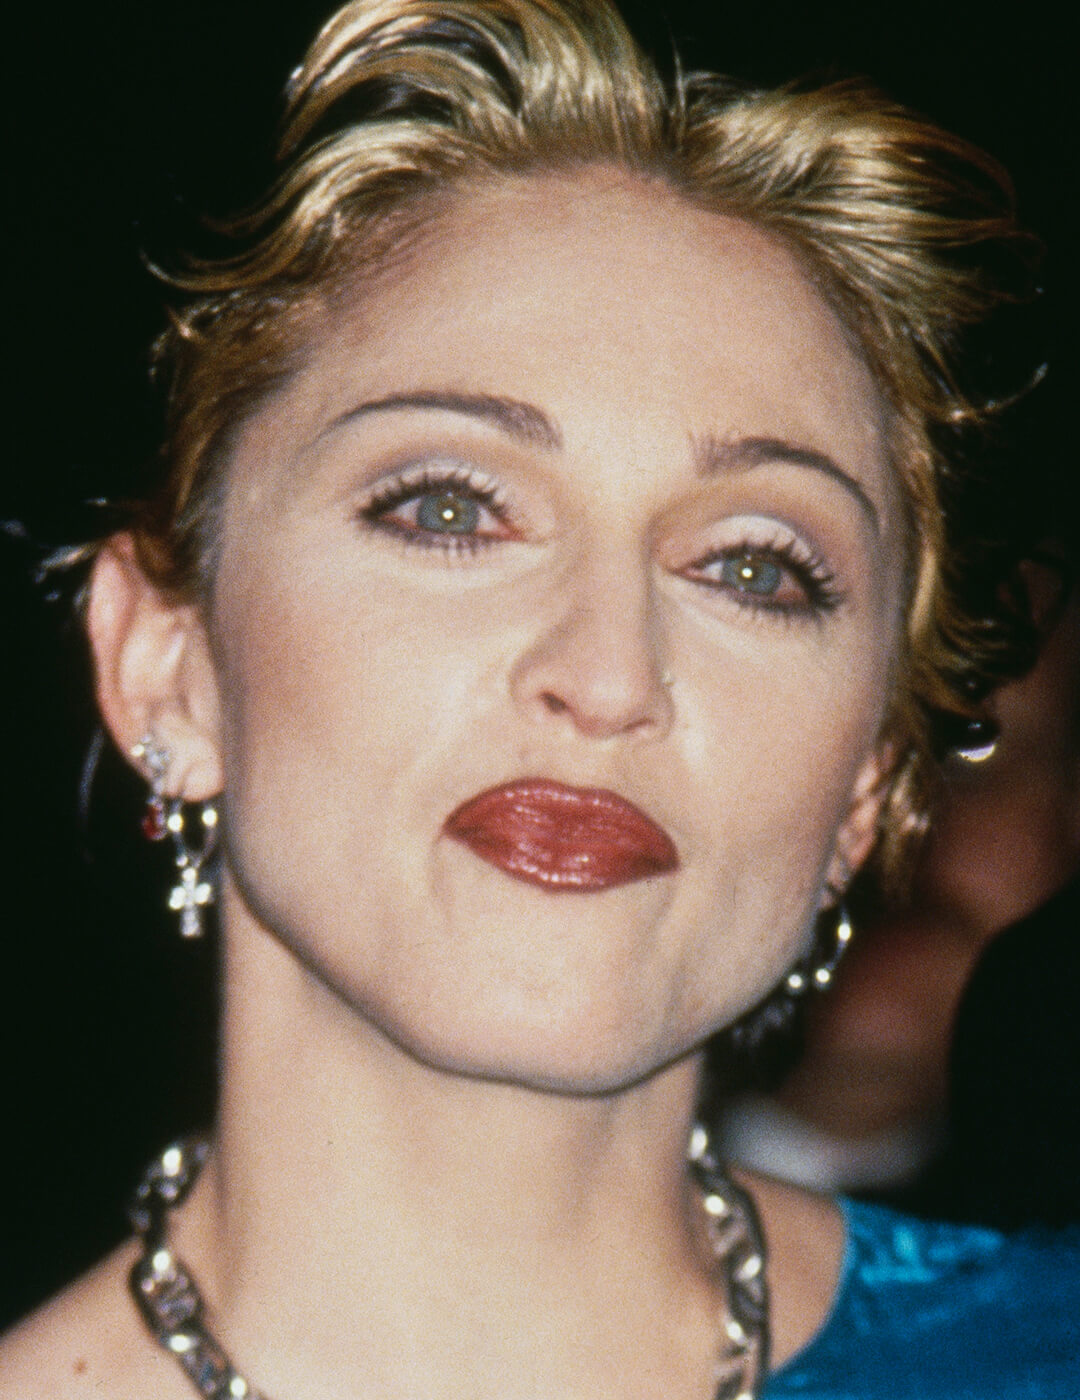 Younger Madonna rocking a cut crease eye makeup look and dark red lips